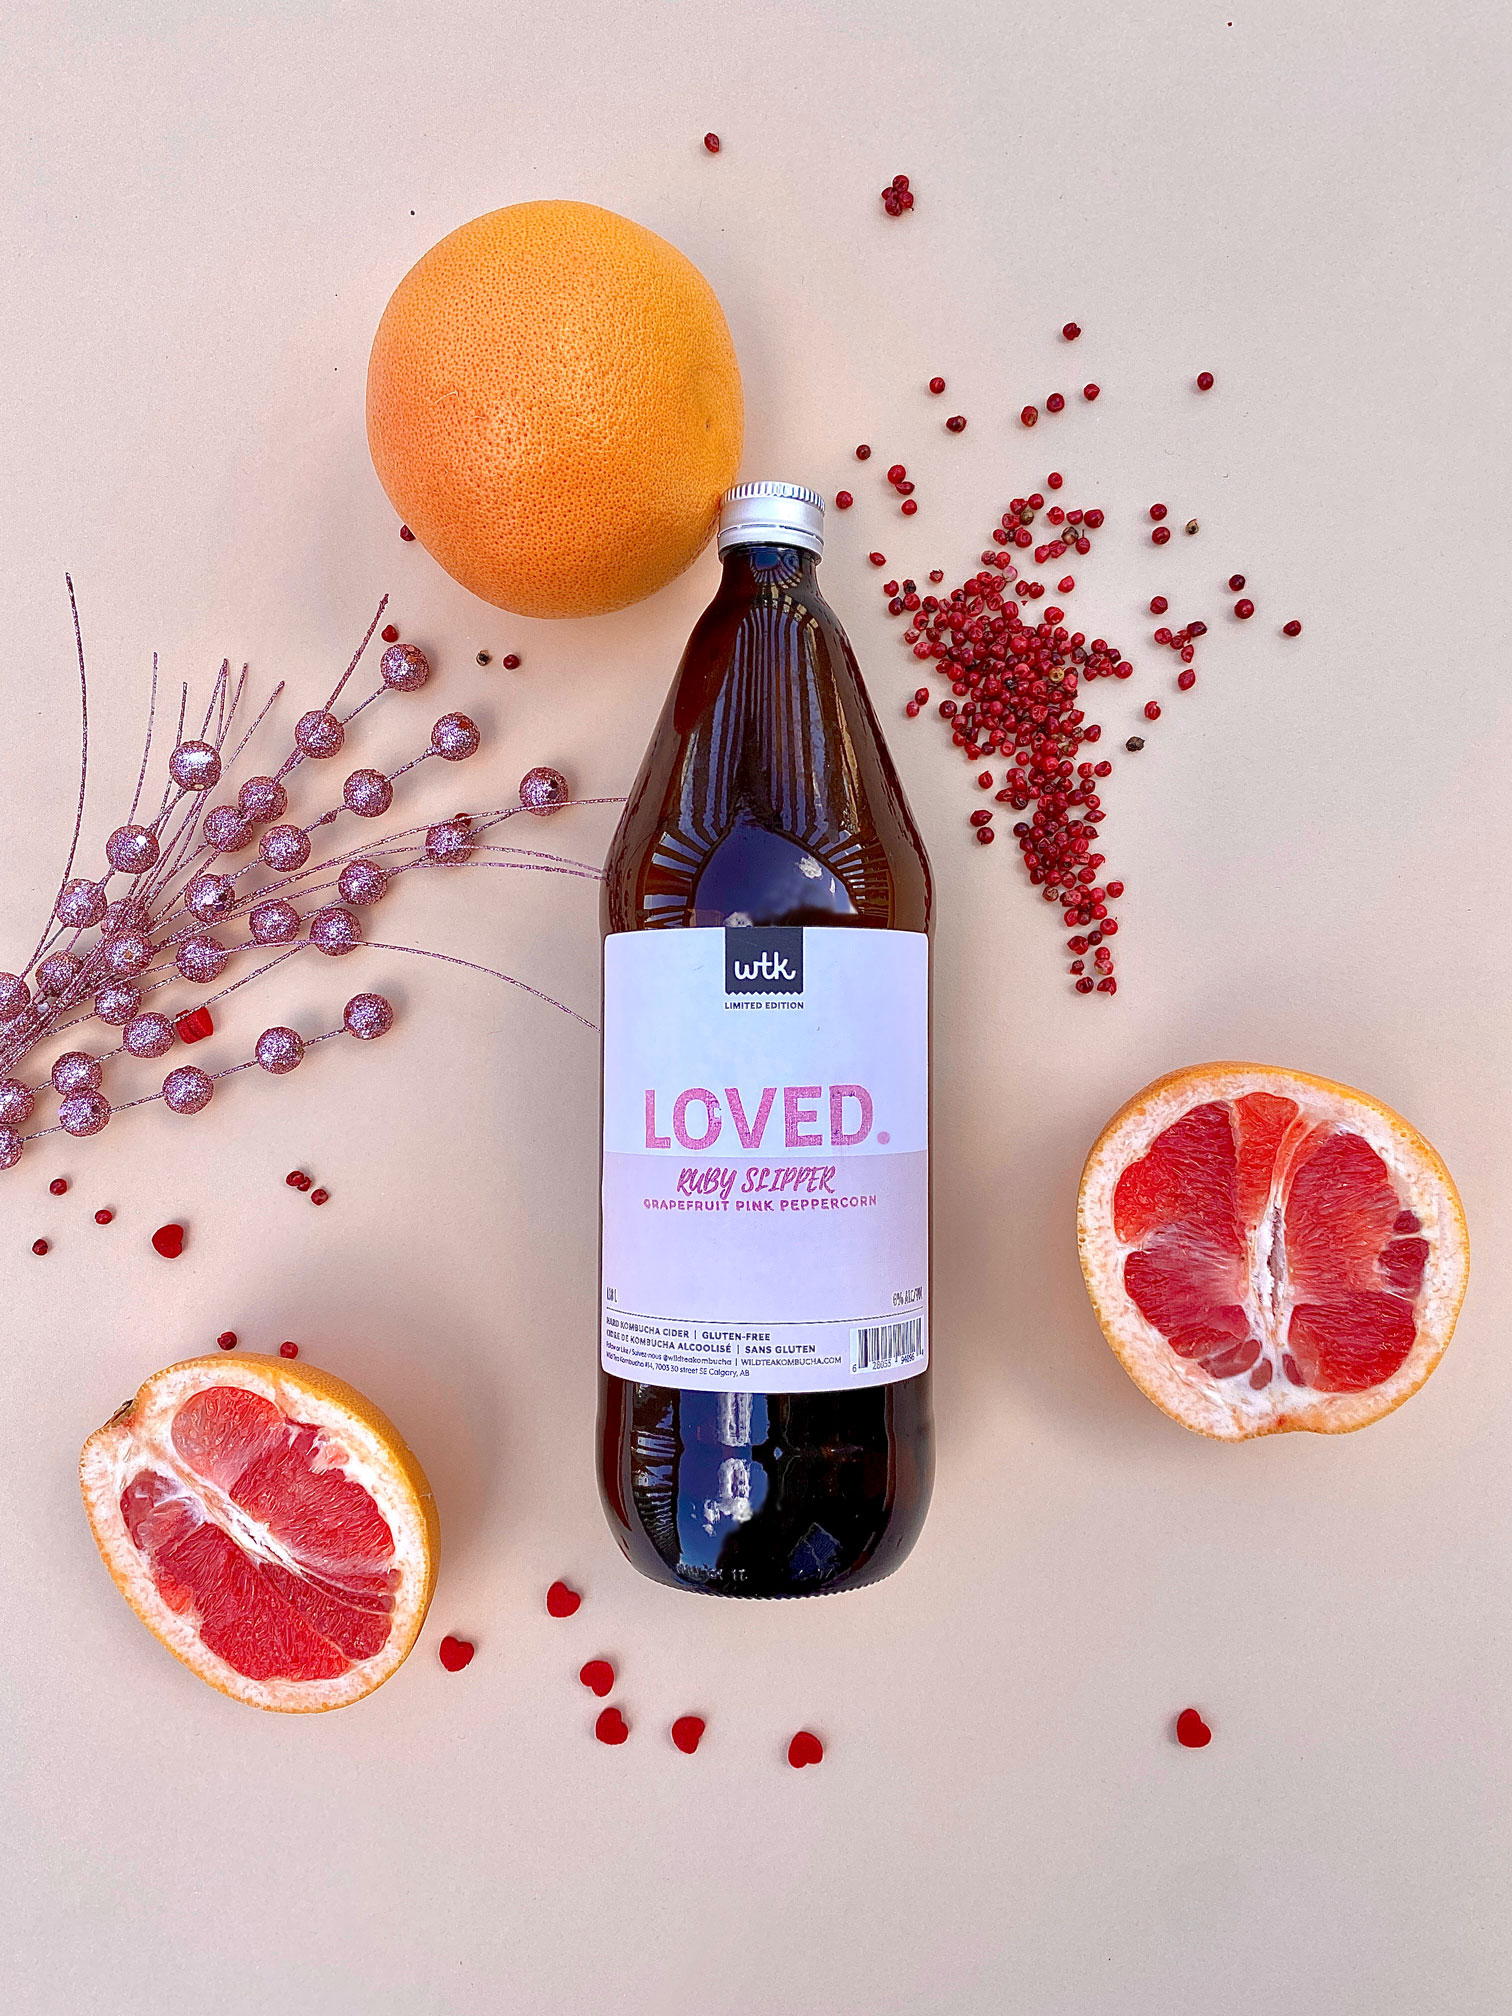 Loved Collection Kombucha by Wild Tea